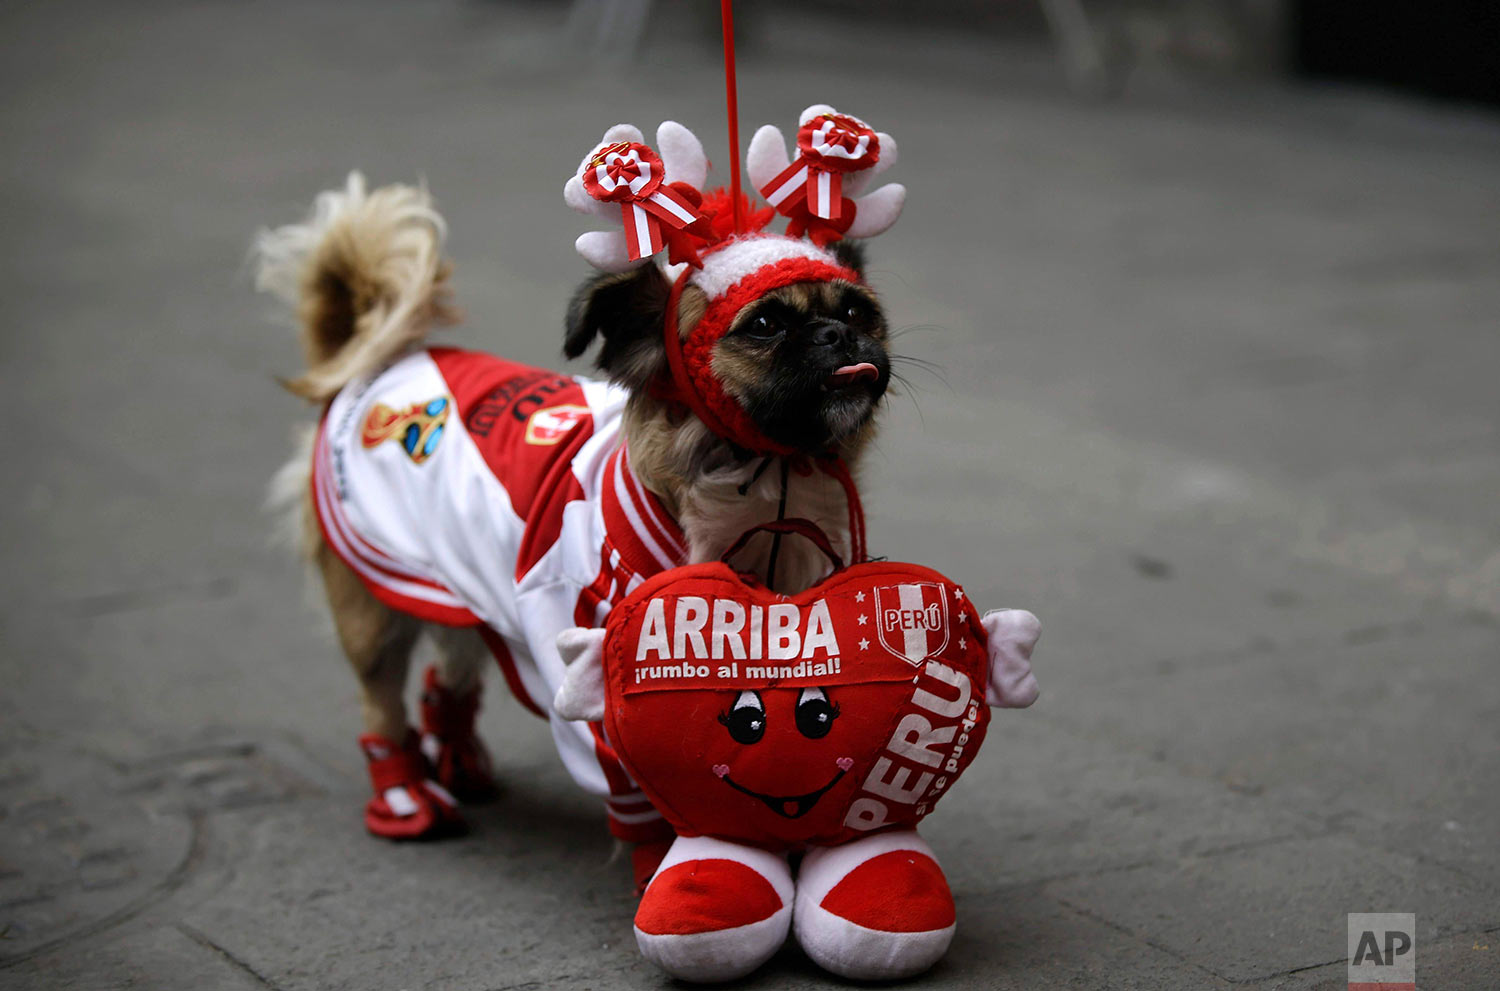  A dog named "Perlita," or Little Pearl, who is dressed in Peru's colors, stands with its owner during a live broadcast of the World Cup match between France and Peru in Lima, Peru, June 21, 2018.(AP Photo/Martin Mejia) 